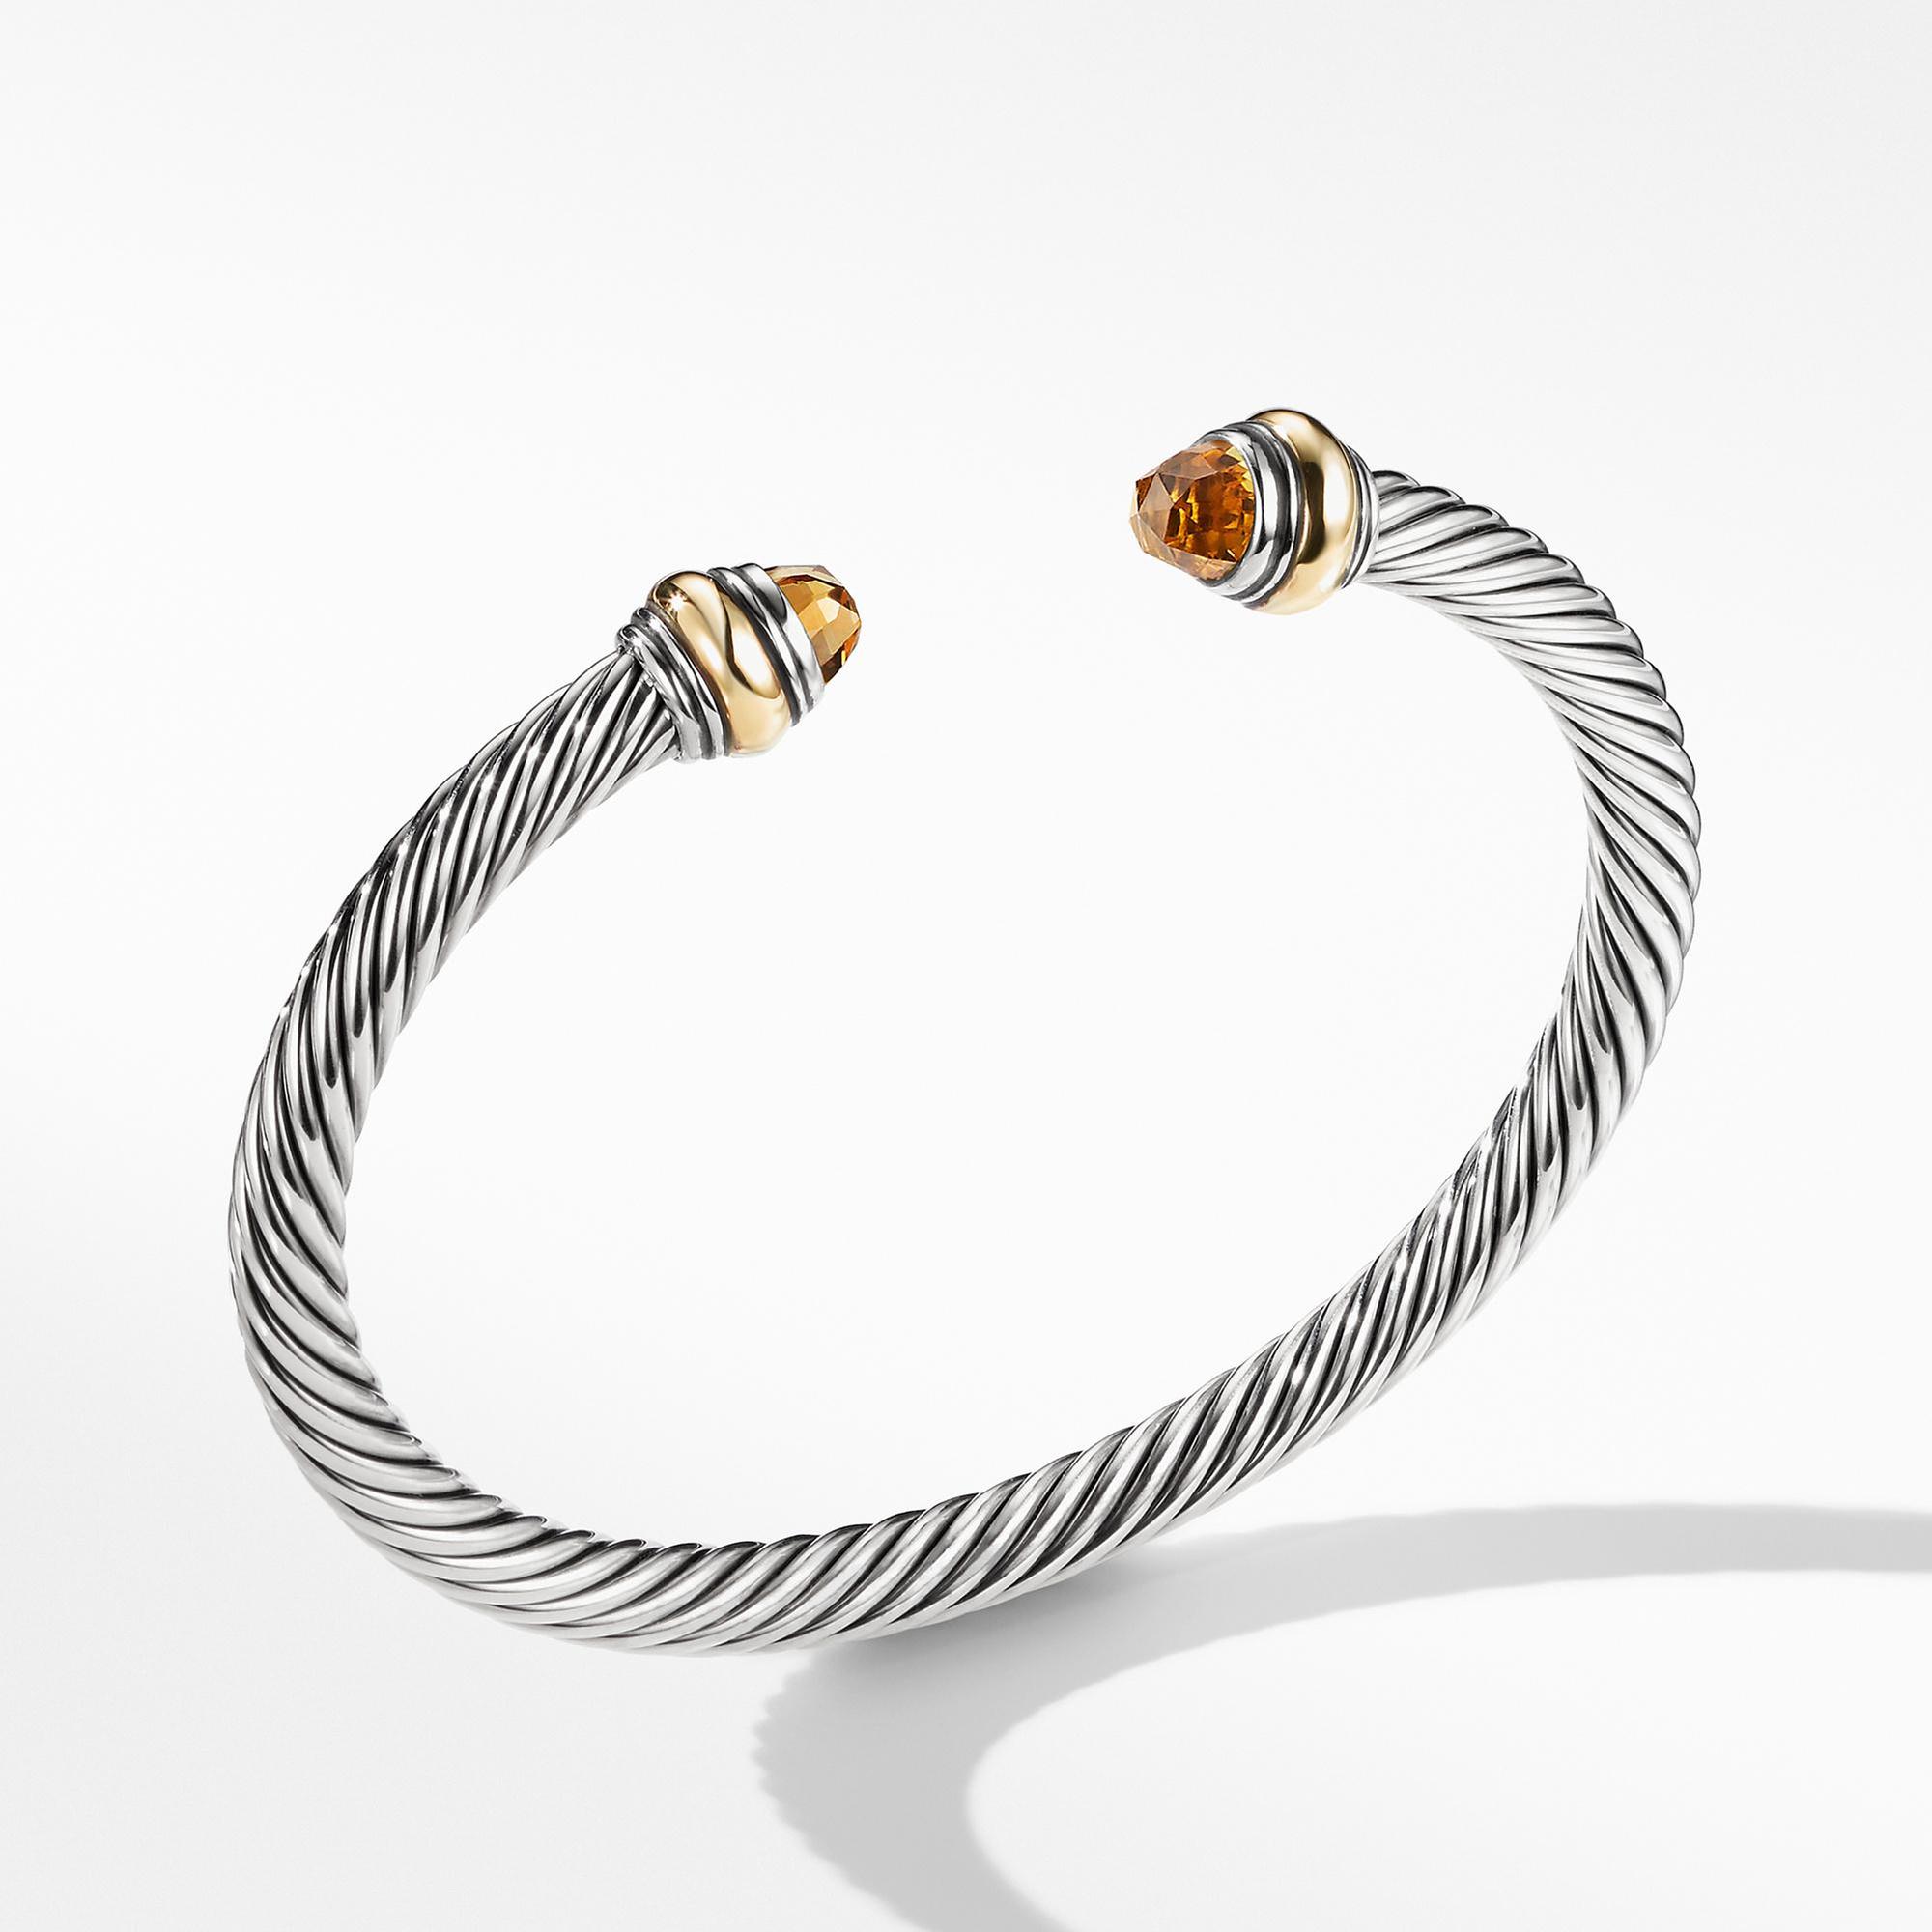 David Yurman Cable Classic Bracelet with Citrine and 14k Gold, 5mm